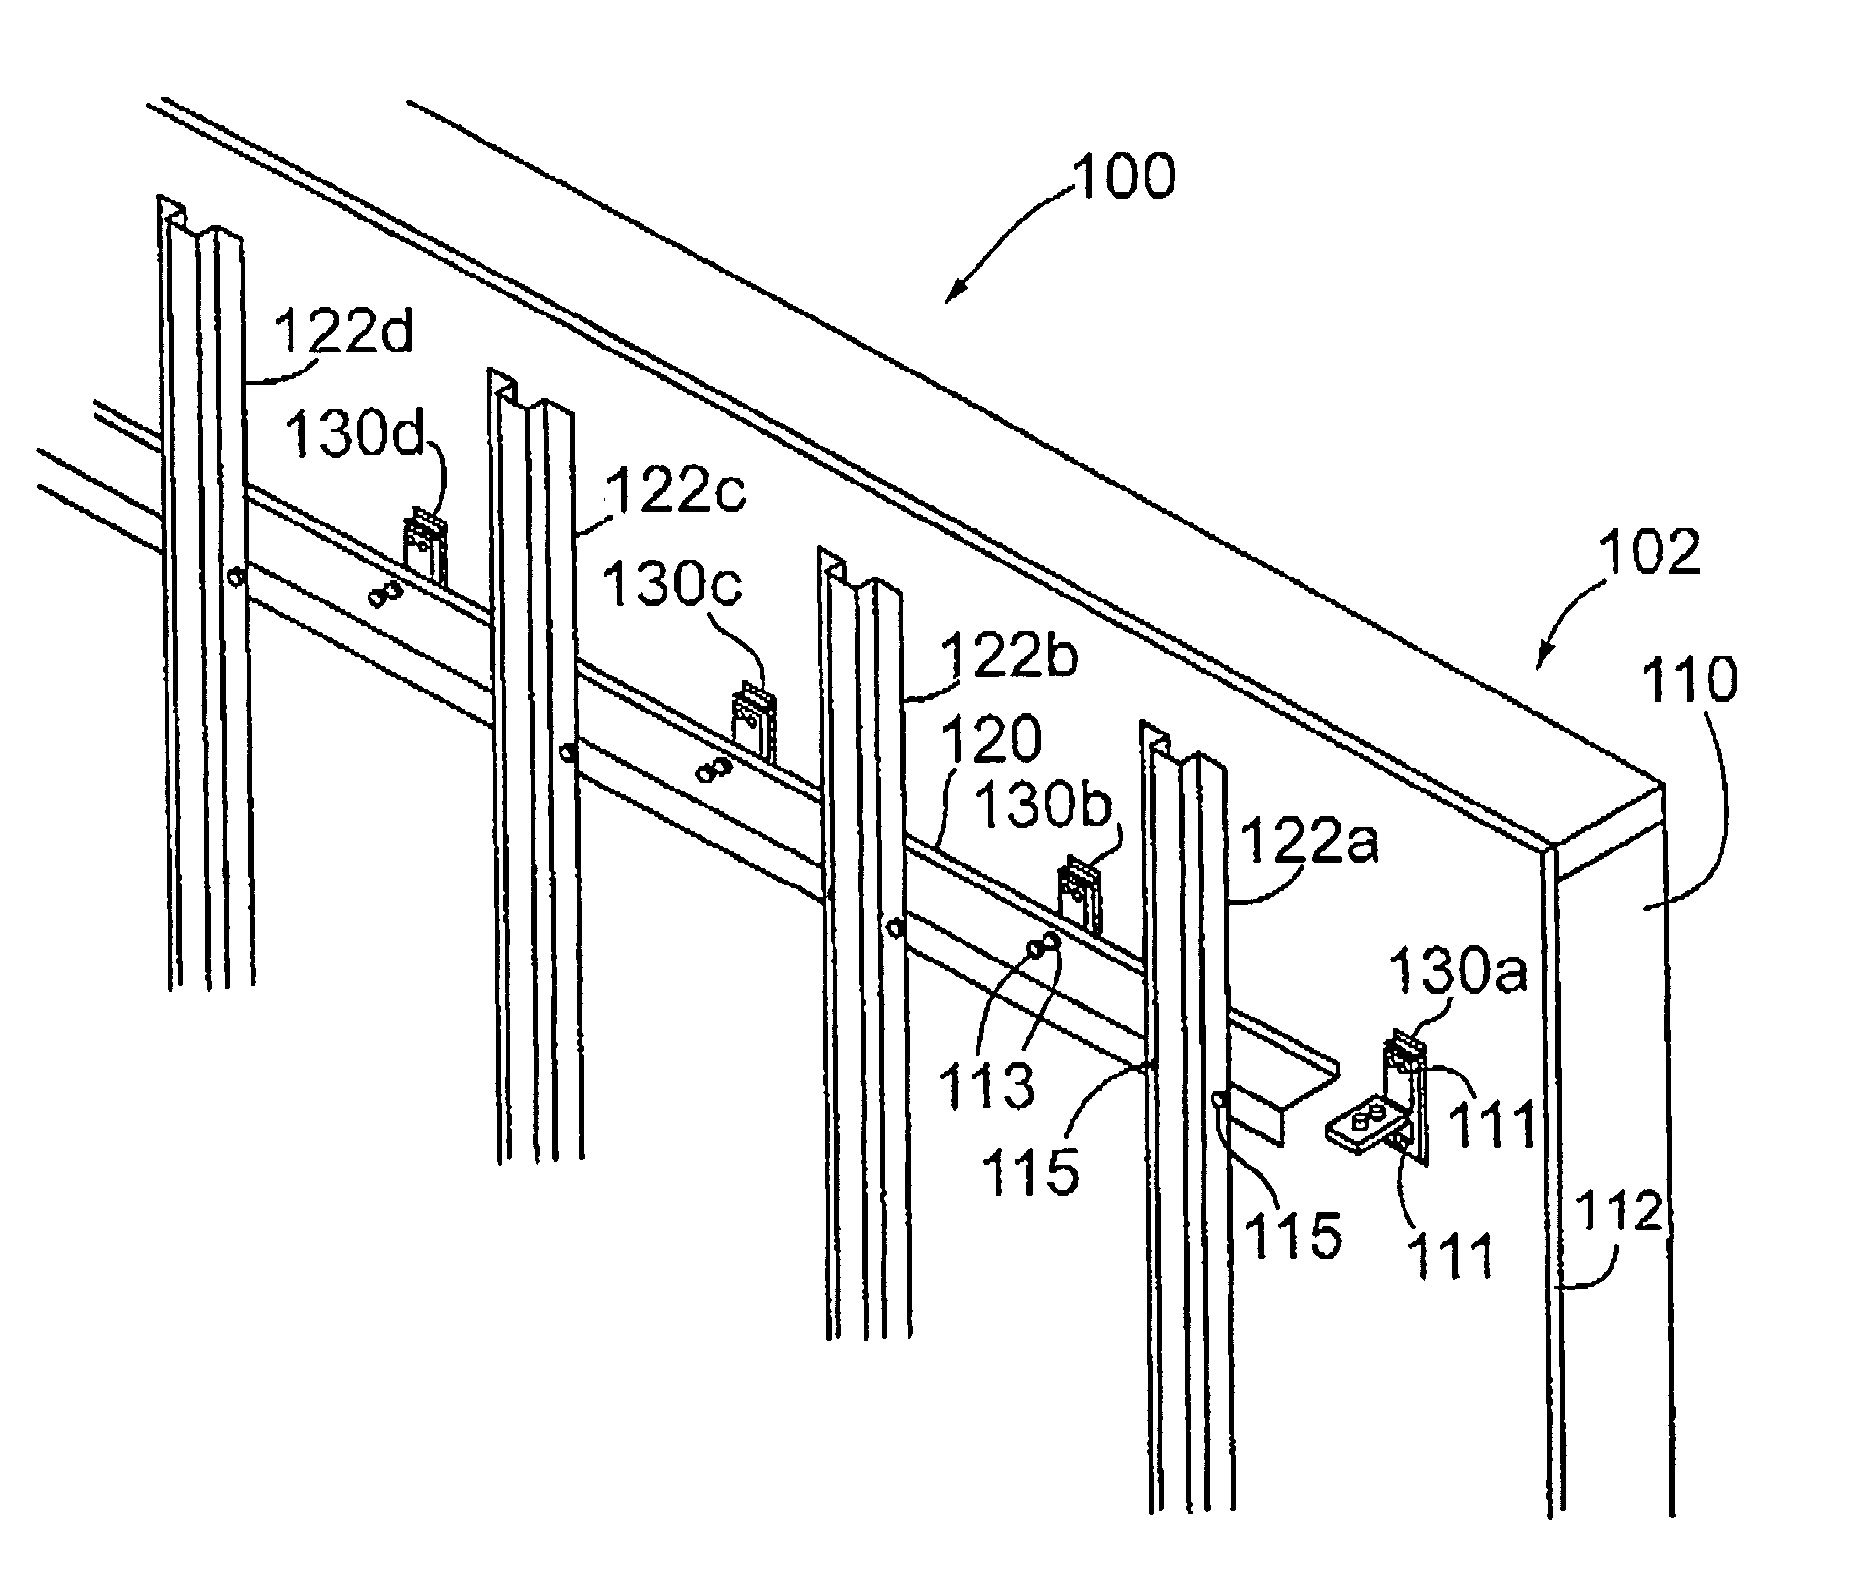 Thermal clip system and apparatus for a building wall assembly